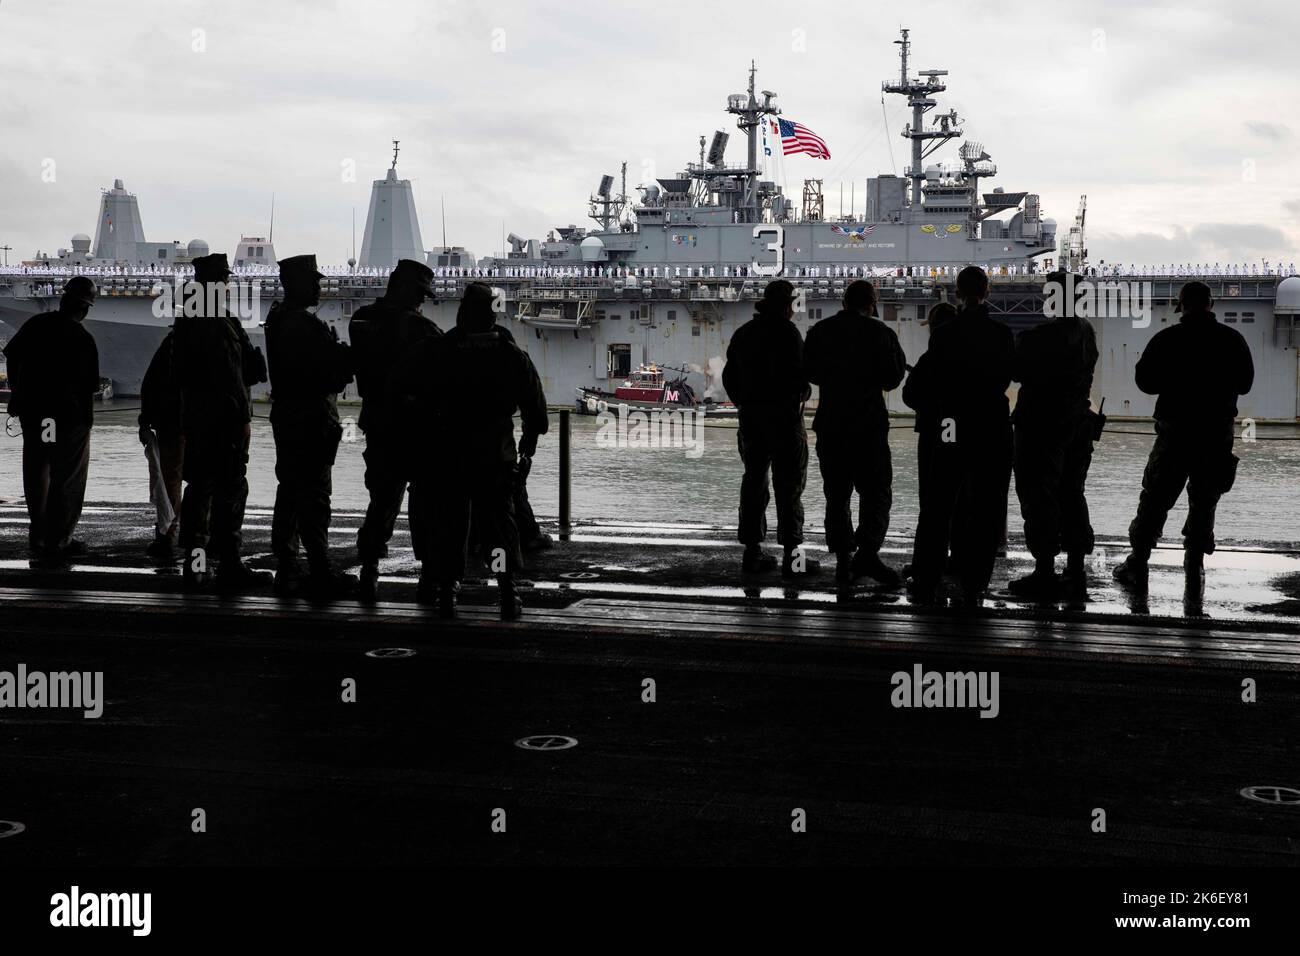 Norfork, United States. 13th Oct, 2022. U.S. Navy sailors aboard the Wasp-class amphibious assault ship USS Wasp watch from the hangar bay as the USS Kearsarge returns to homeport Naval Station Norfolk, October 13, 2022 in Norfork, Virginia. The Kearsarge is returning from a seven-month deployment operating in the High North and Baltic Sea. Credit: MC2 Benjamin F. Davella III/US Navy/Alamy Live News Stock Photo